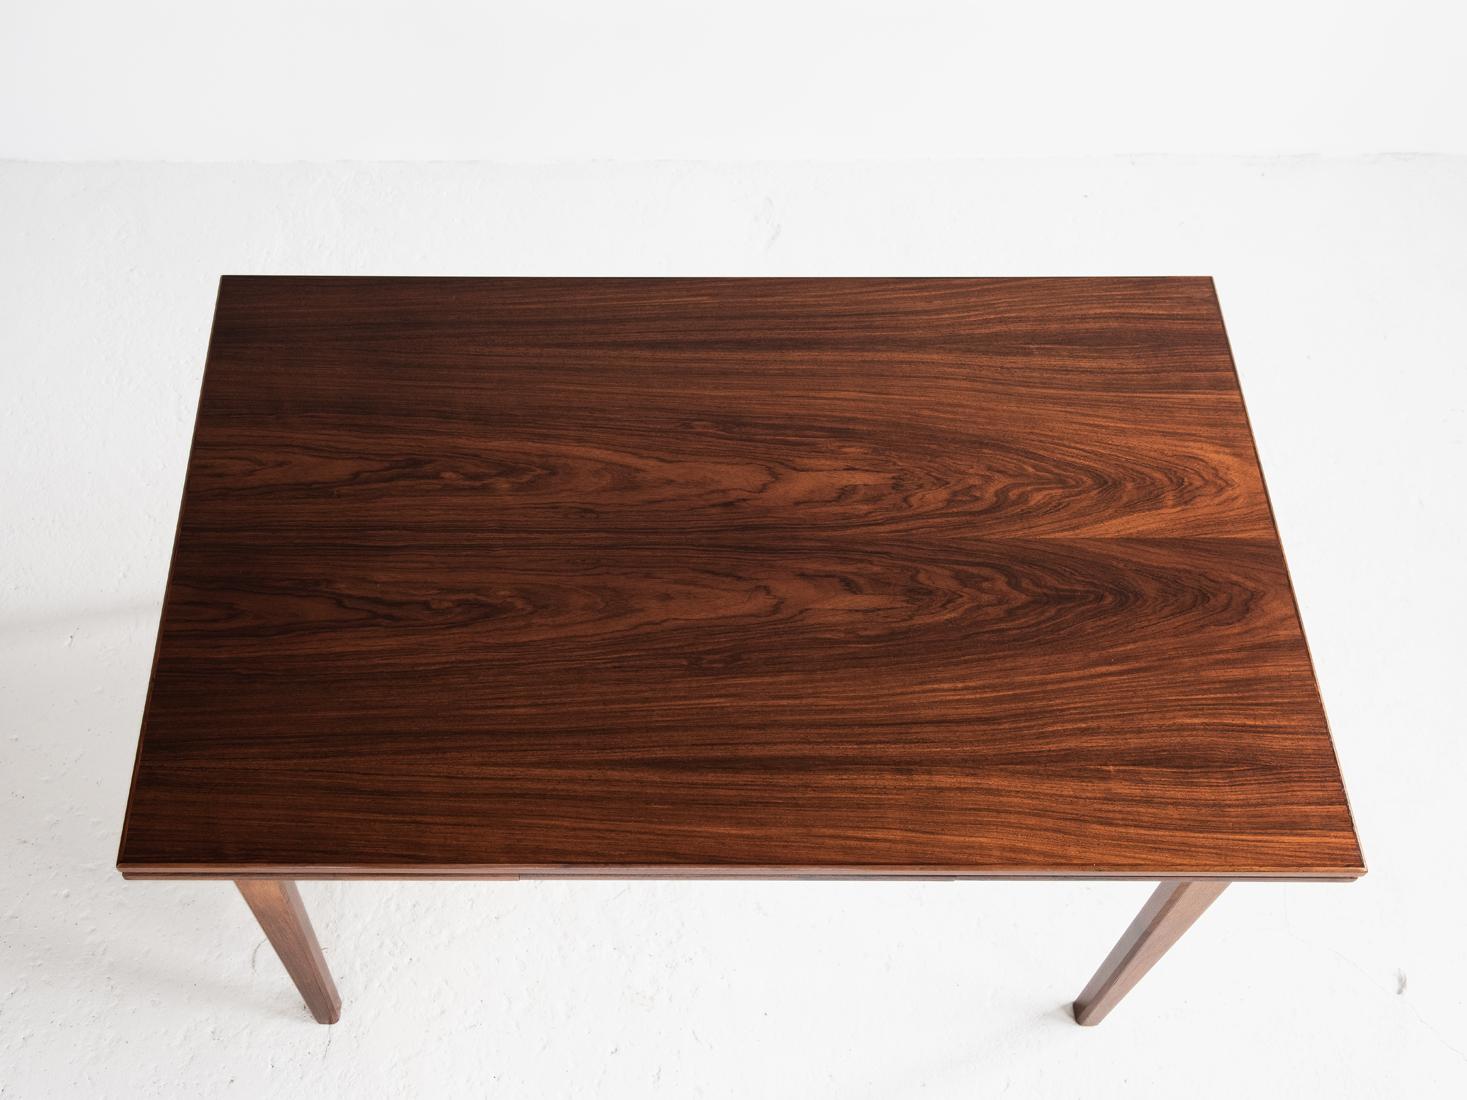 Midcentury Danish Dining Table in Rosewood with 2 Extensions, 1960s For Sale 2